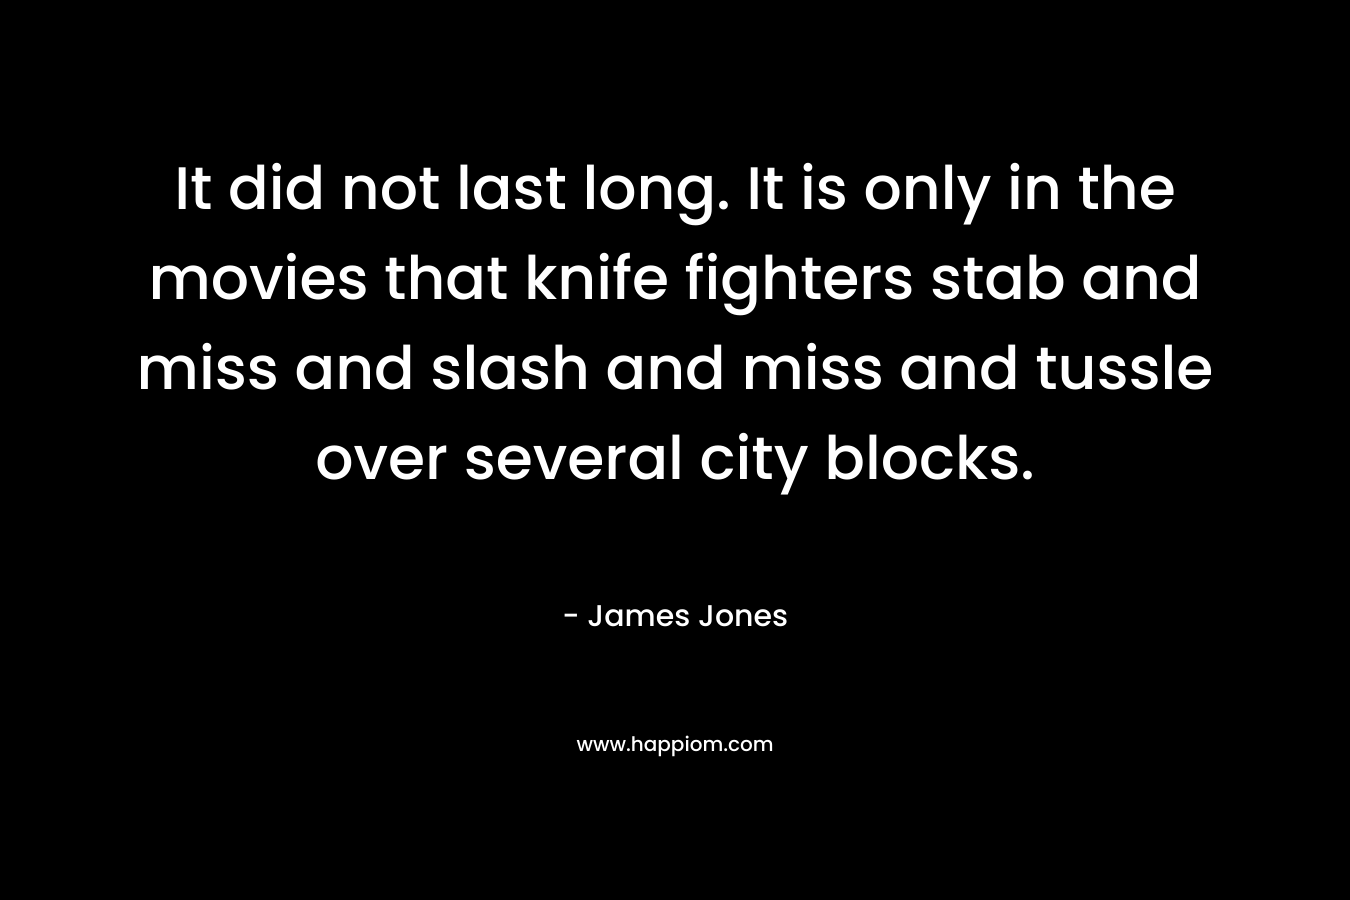 It did not last long. It is only in the movies that knife fighters stab and miss and slash and miss and tussle over several city blocks.